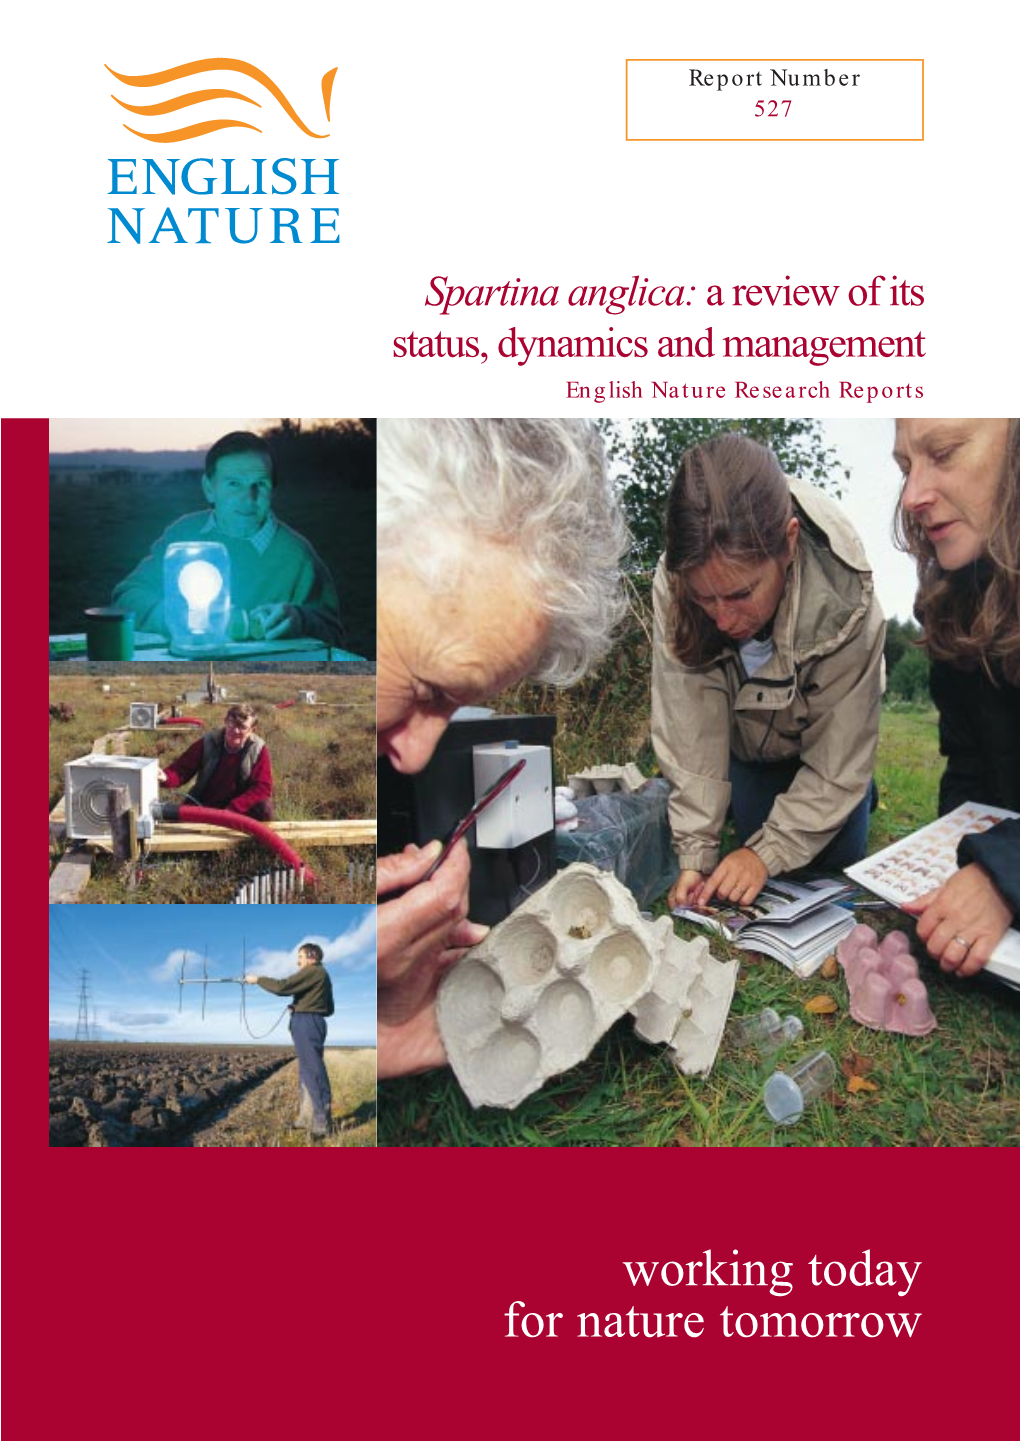 Spartina Anglica: a Review of Its Status, Dynamics and Management English Nature Research Reports